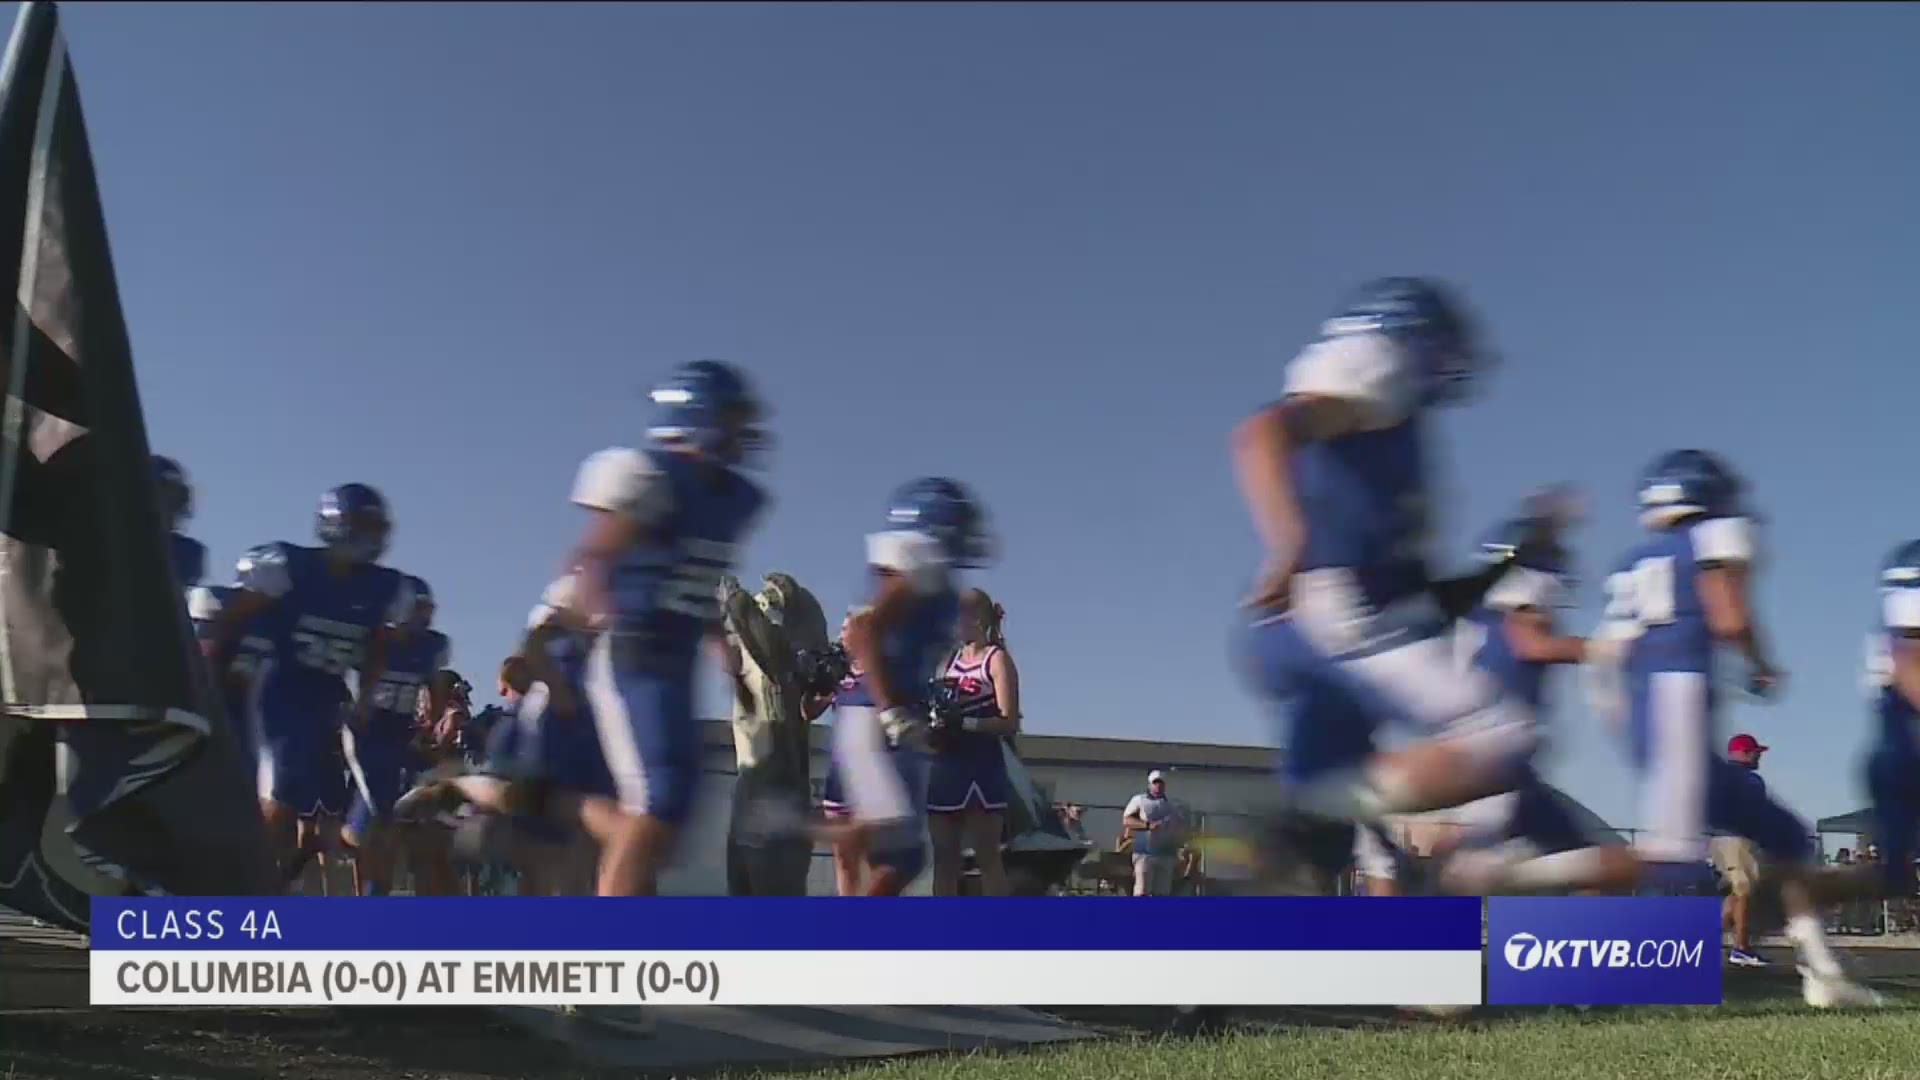 Emmett falls to Columbia 21-12 in the season-opener in Class 4A play.